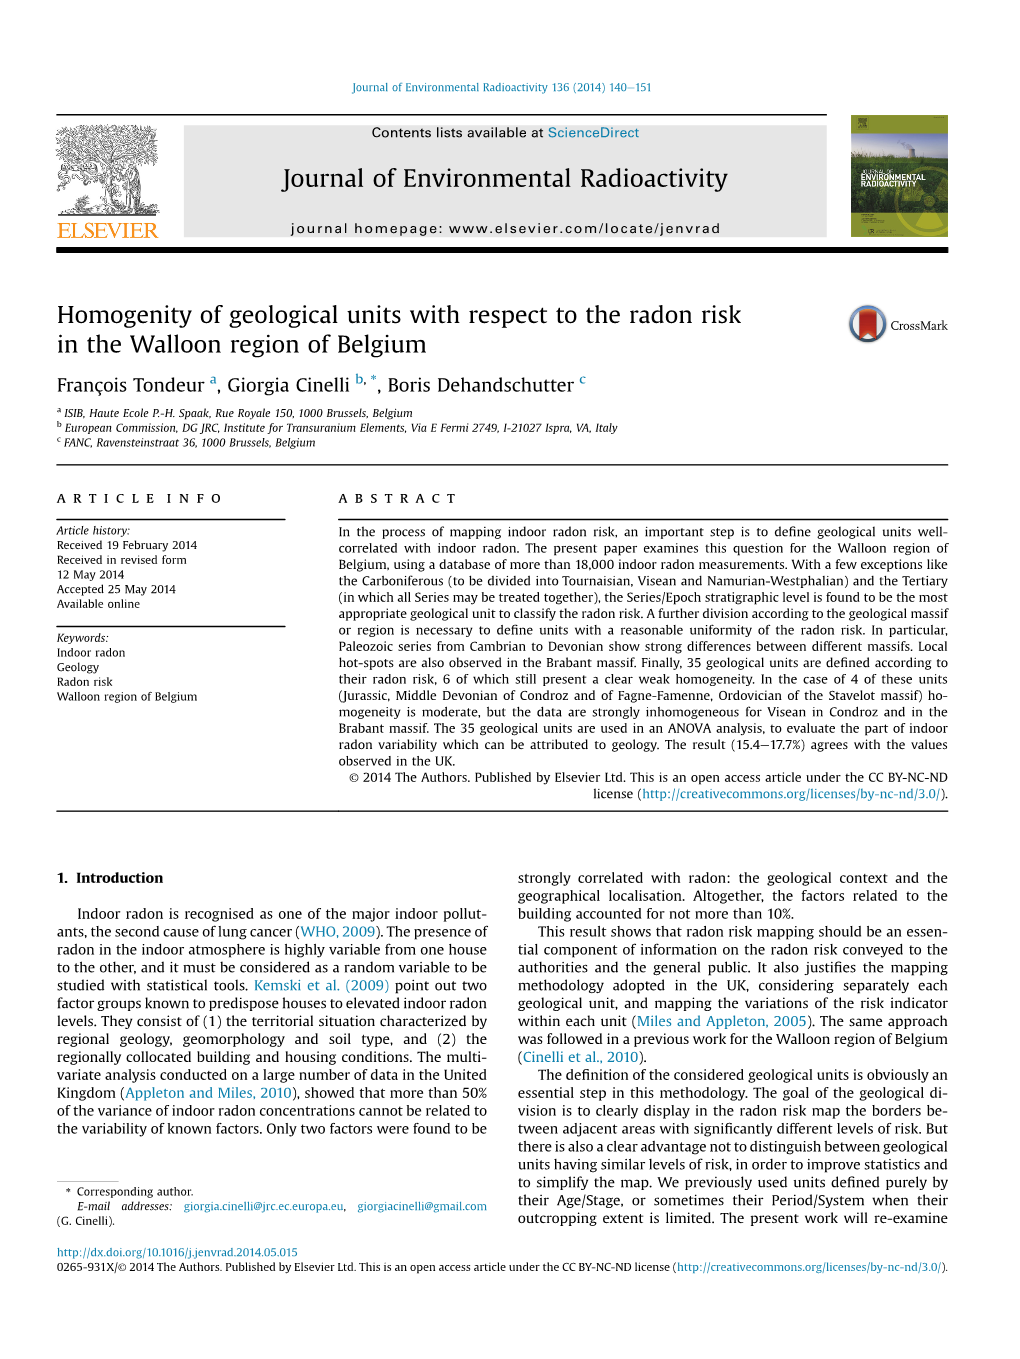 Homogenity of Geological Units with Respect to the Radon Risk in the Walloon Region of Belgium